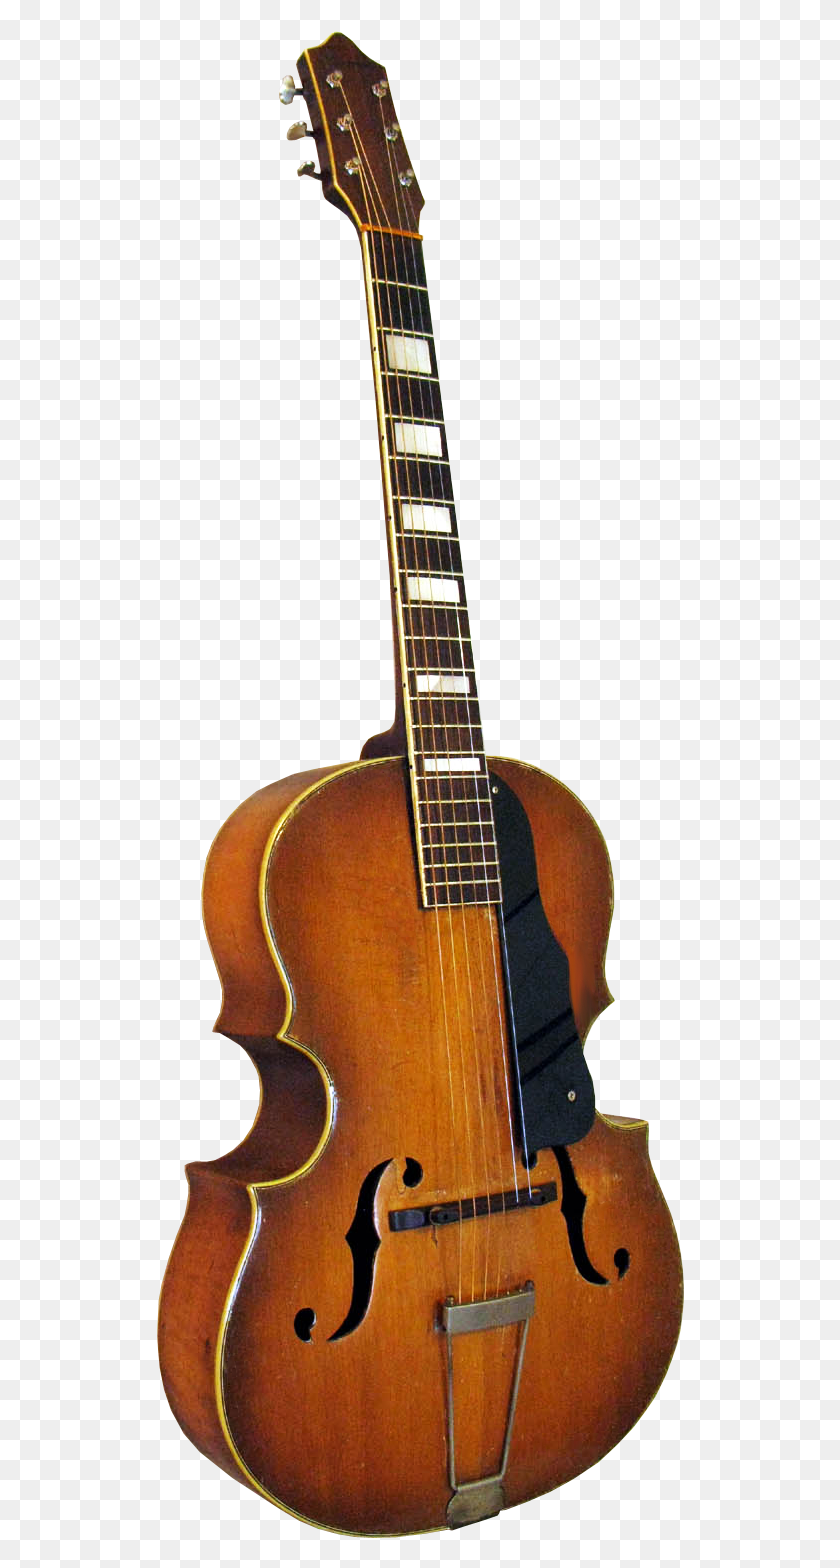 528x1508 Cello Guitar Transparent Image Antiques And Collectibles, Leisure Activities, Musical Instrument, Mandolin HD PNG Download